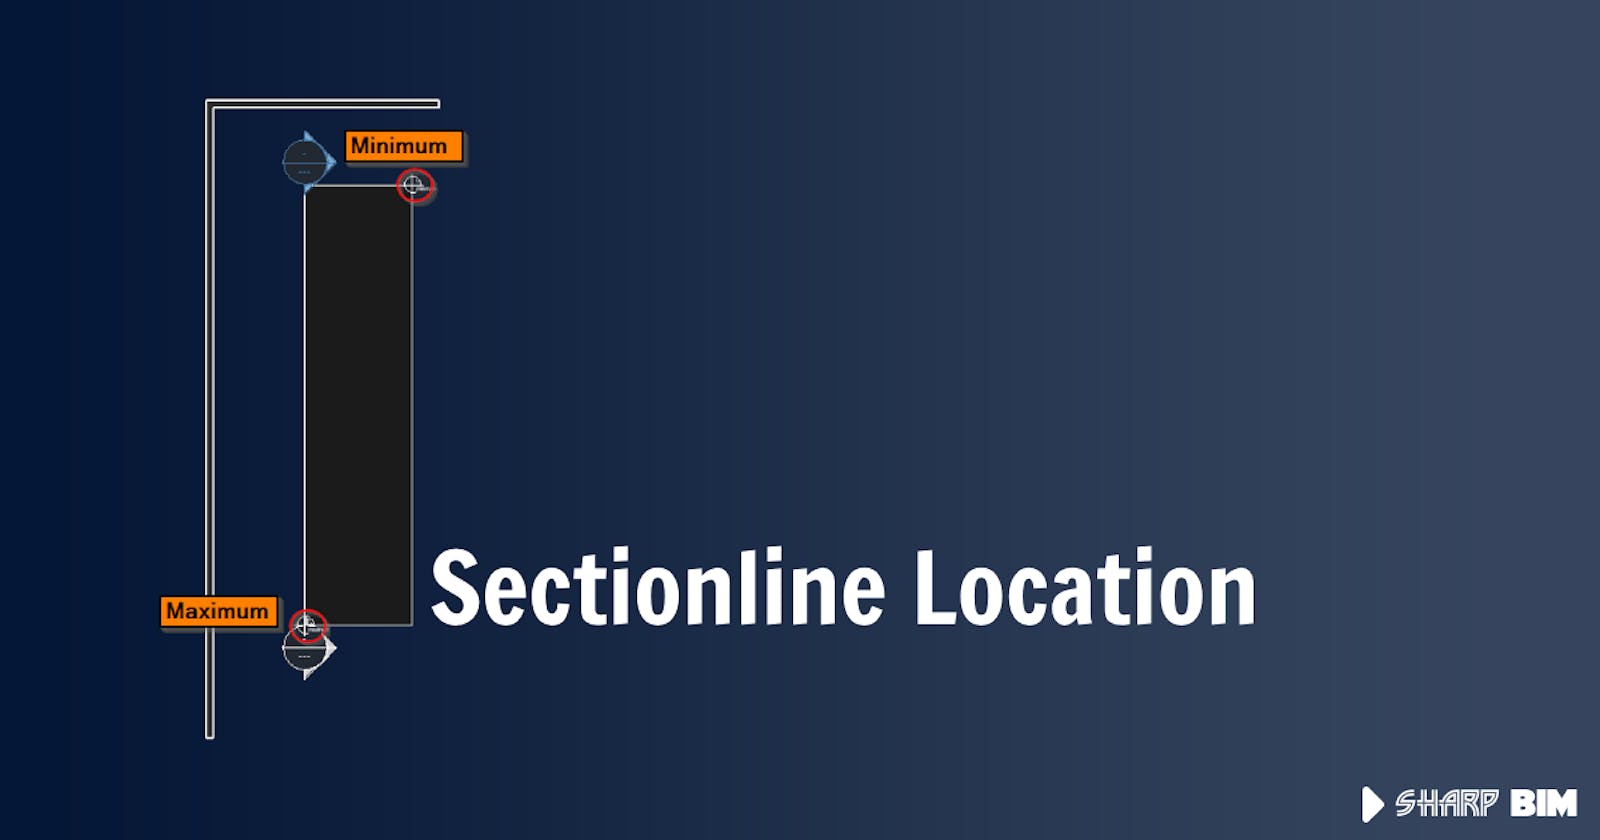 Section line location